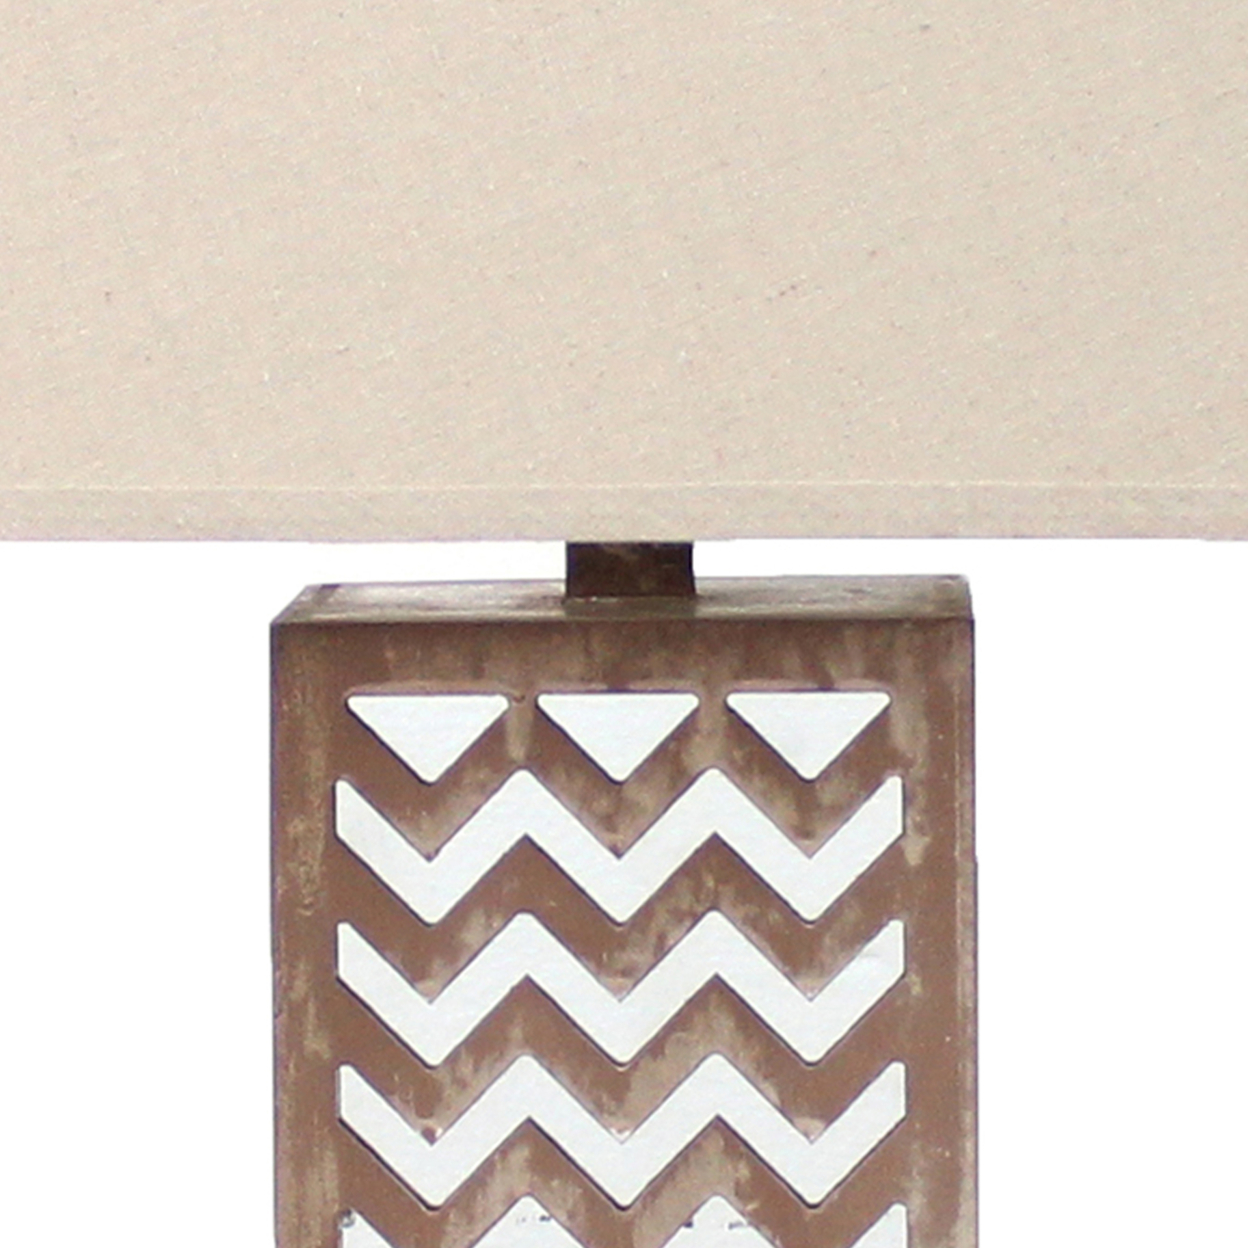 Table Lamp With Chevron Pattern And Mirror Inlay,Brown And Silver- Saltoro Sherpi